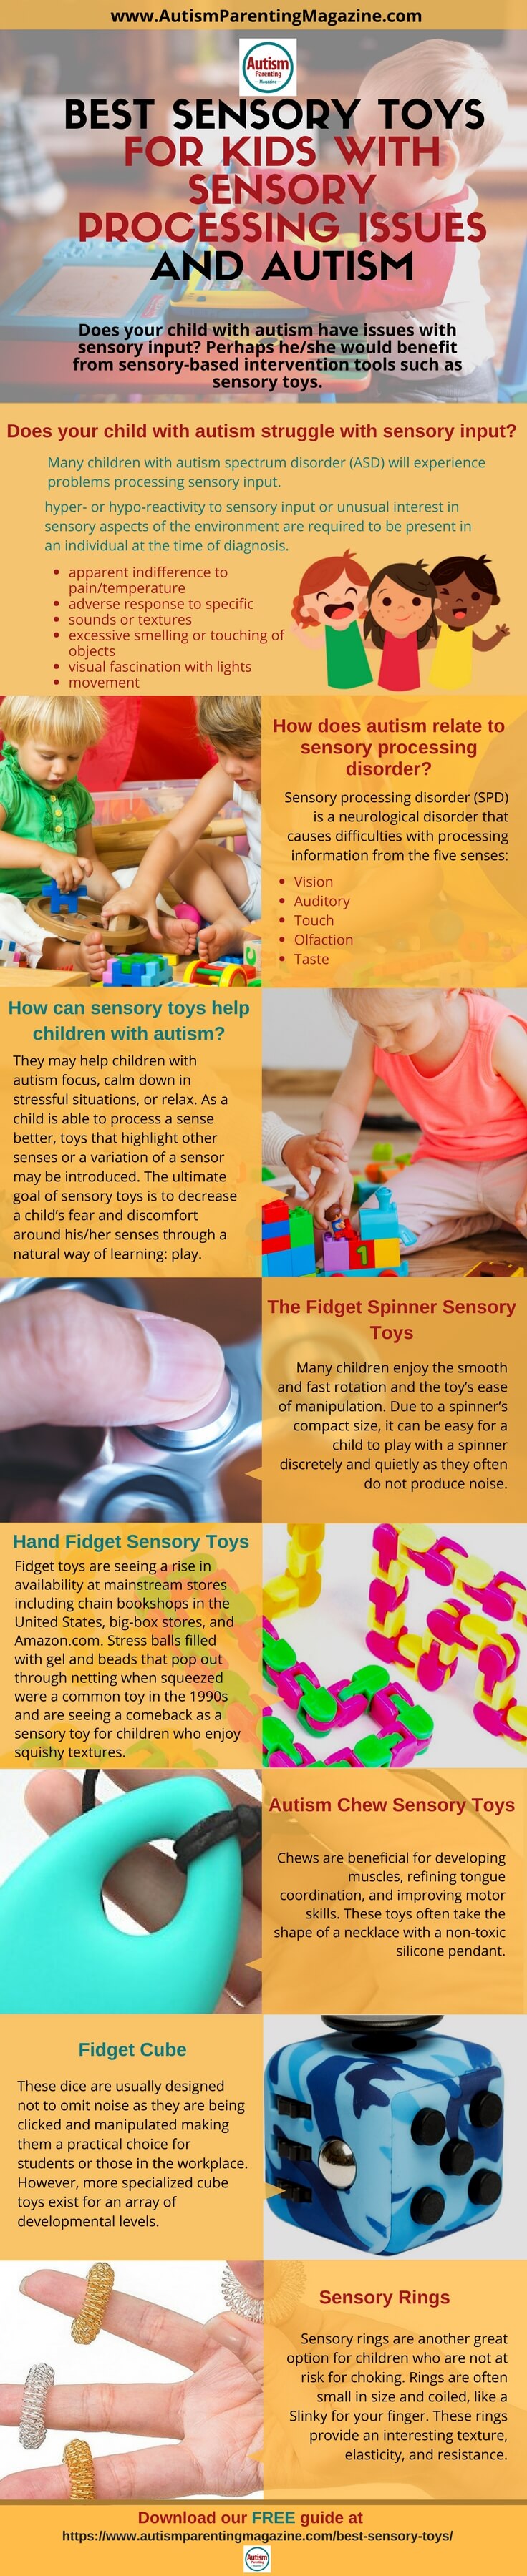 Best Sensory Toys for Kids with Sensory Processing Issues and Autism-infographic-plaza